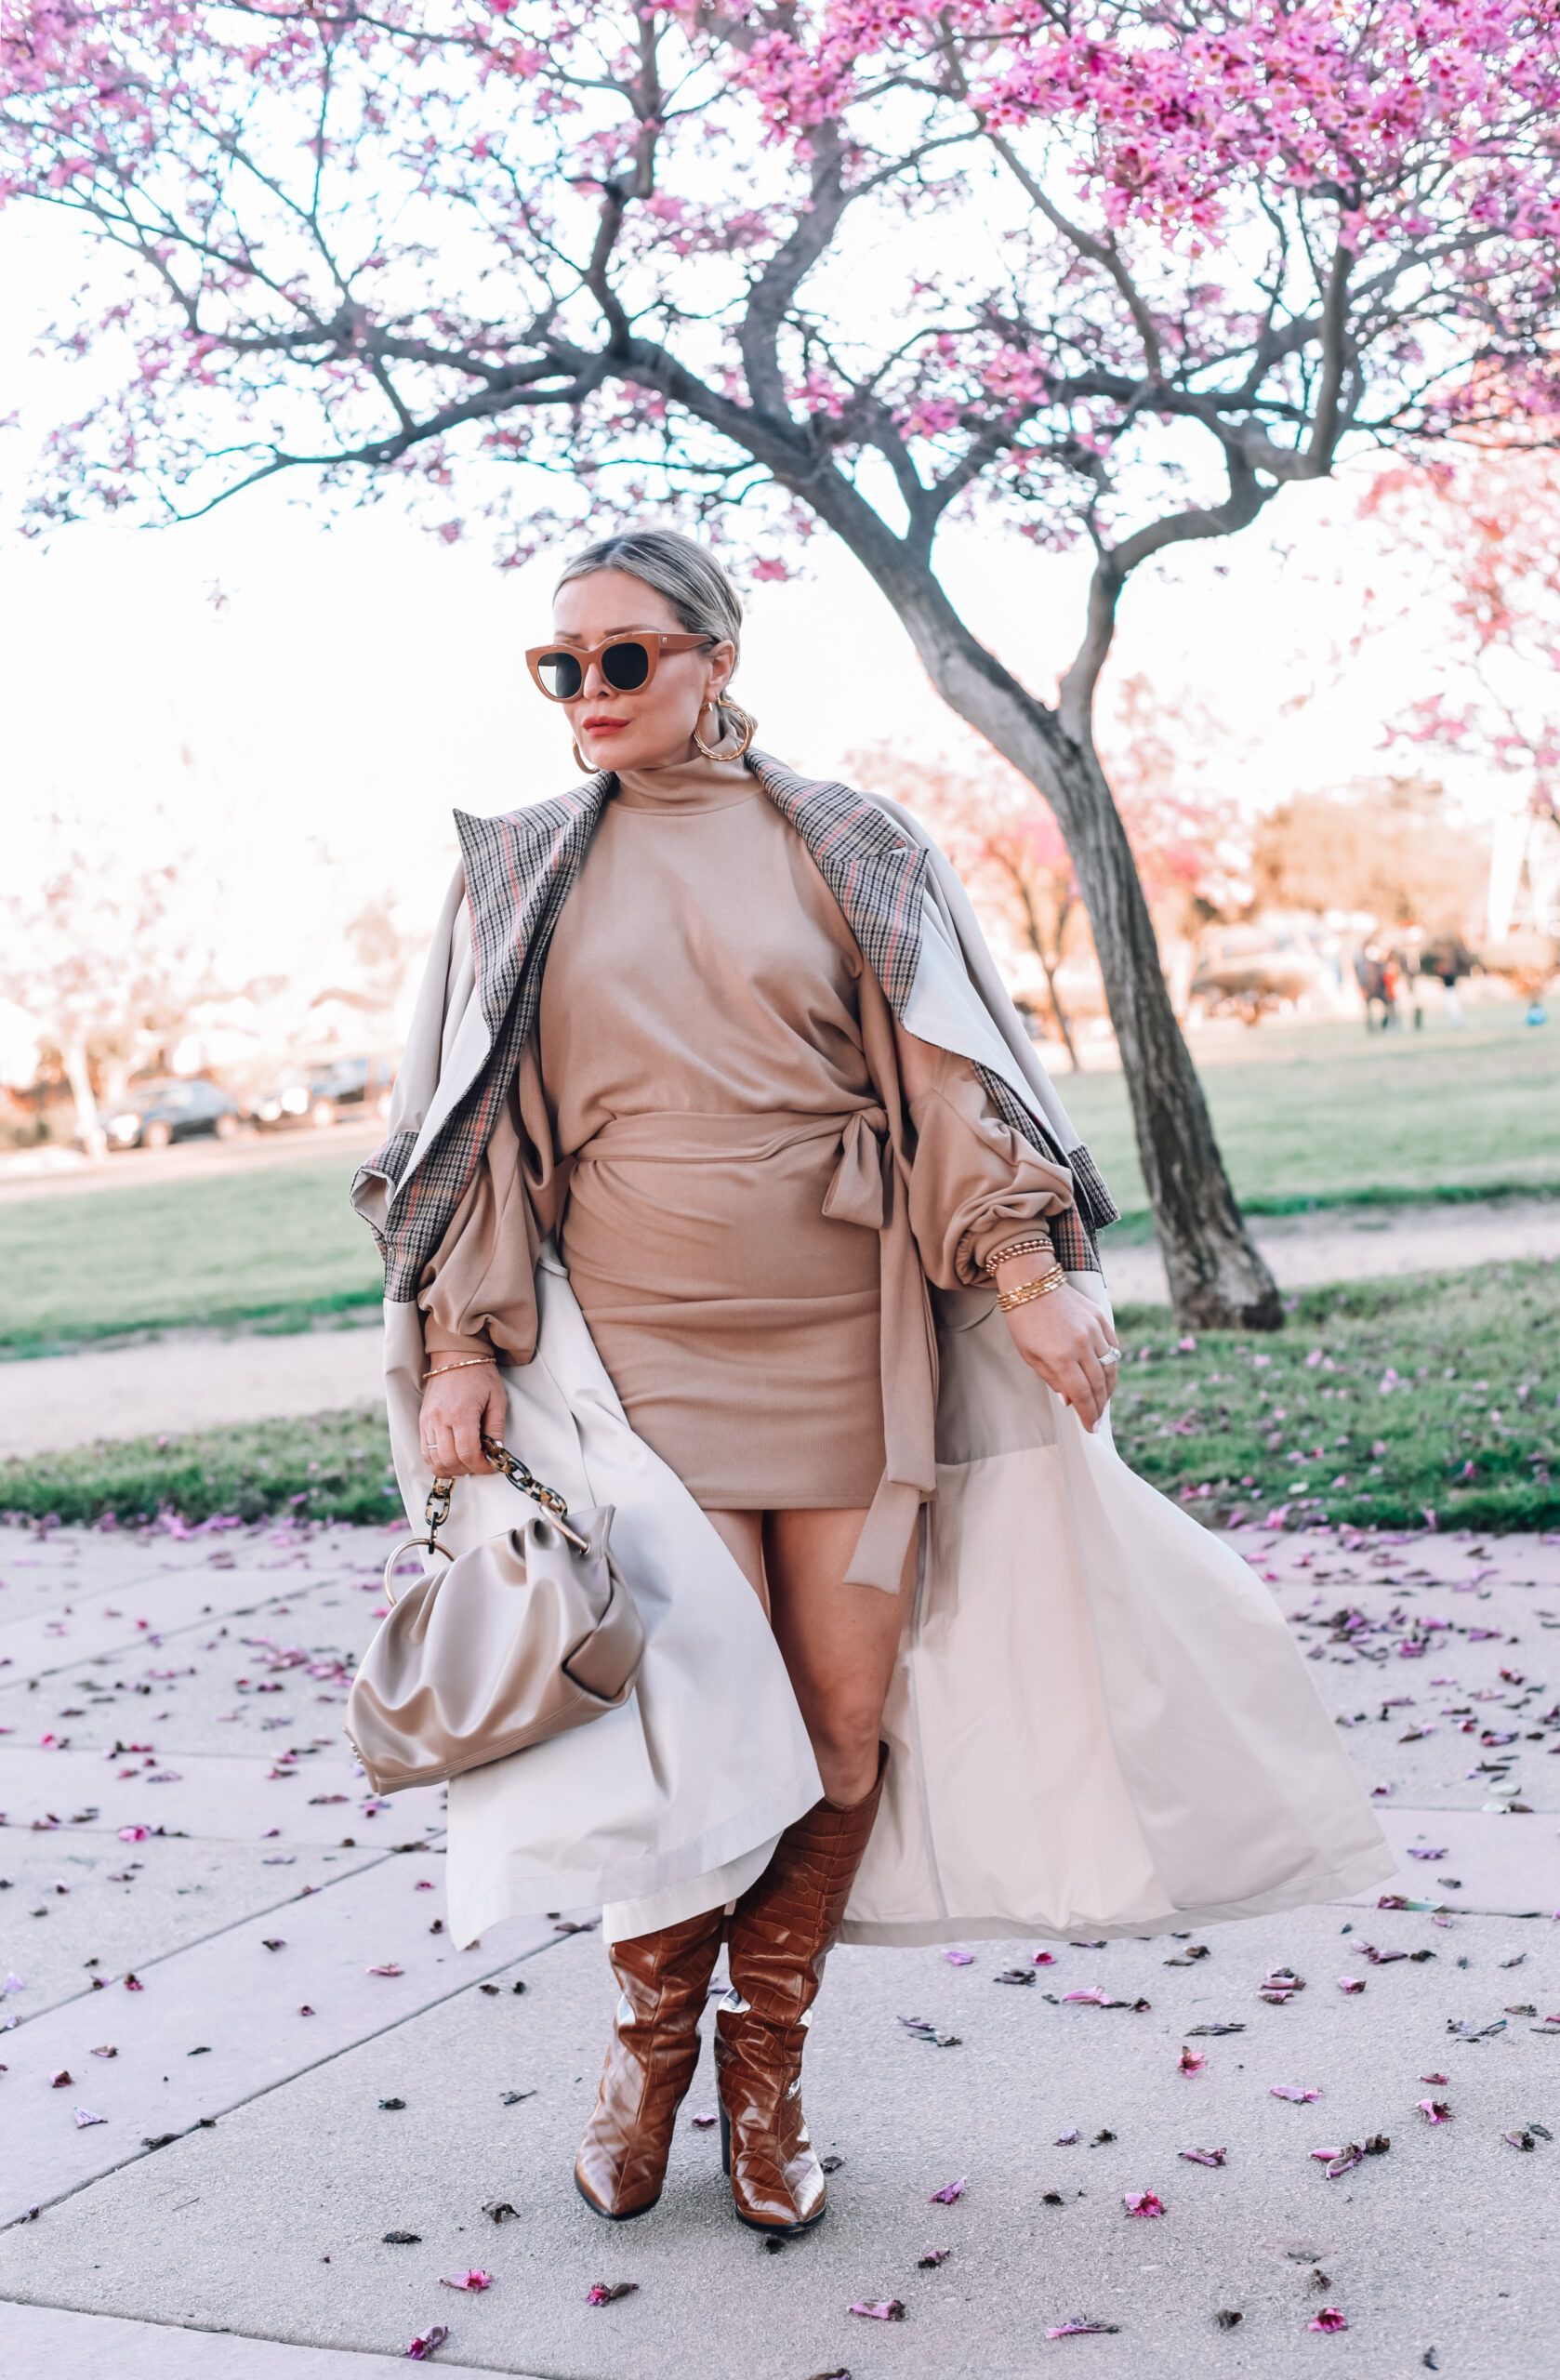 Beige Trench Coat Outfit Ideas
  for Ladies